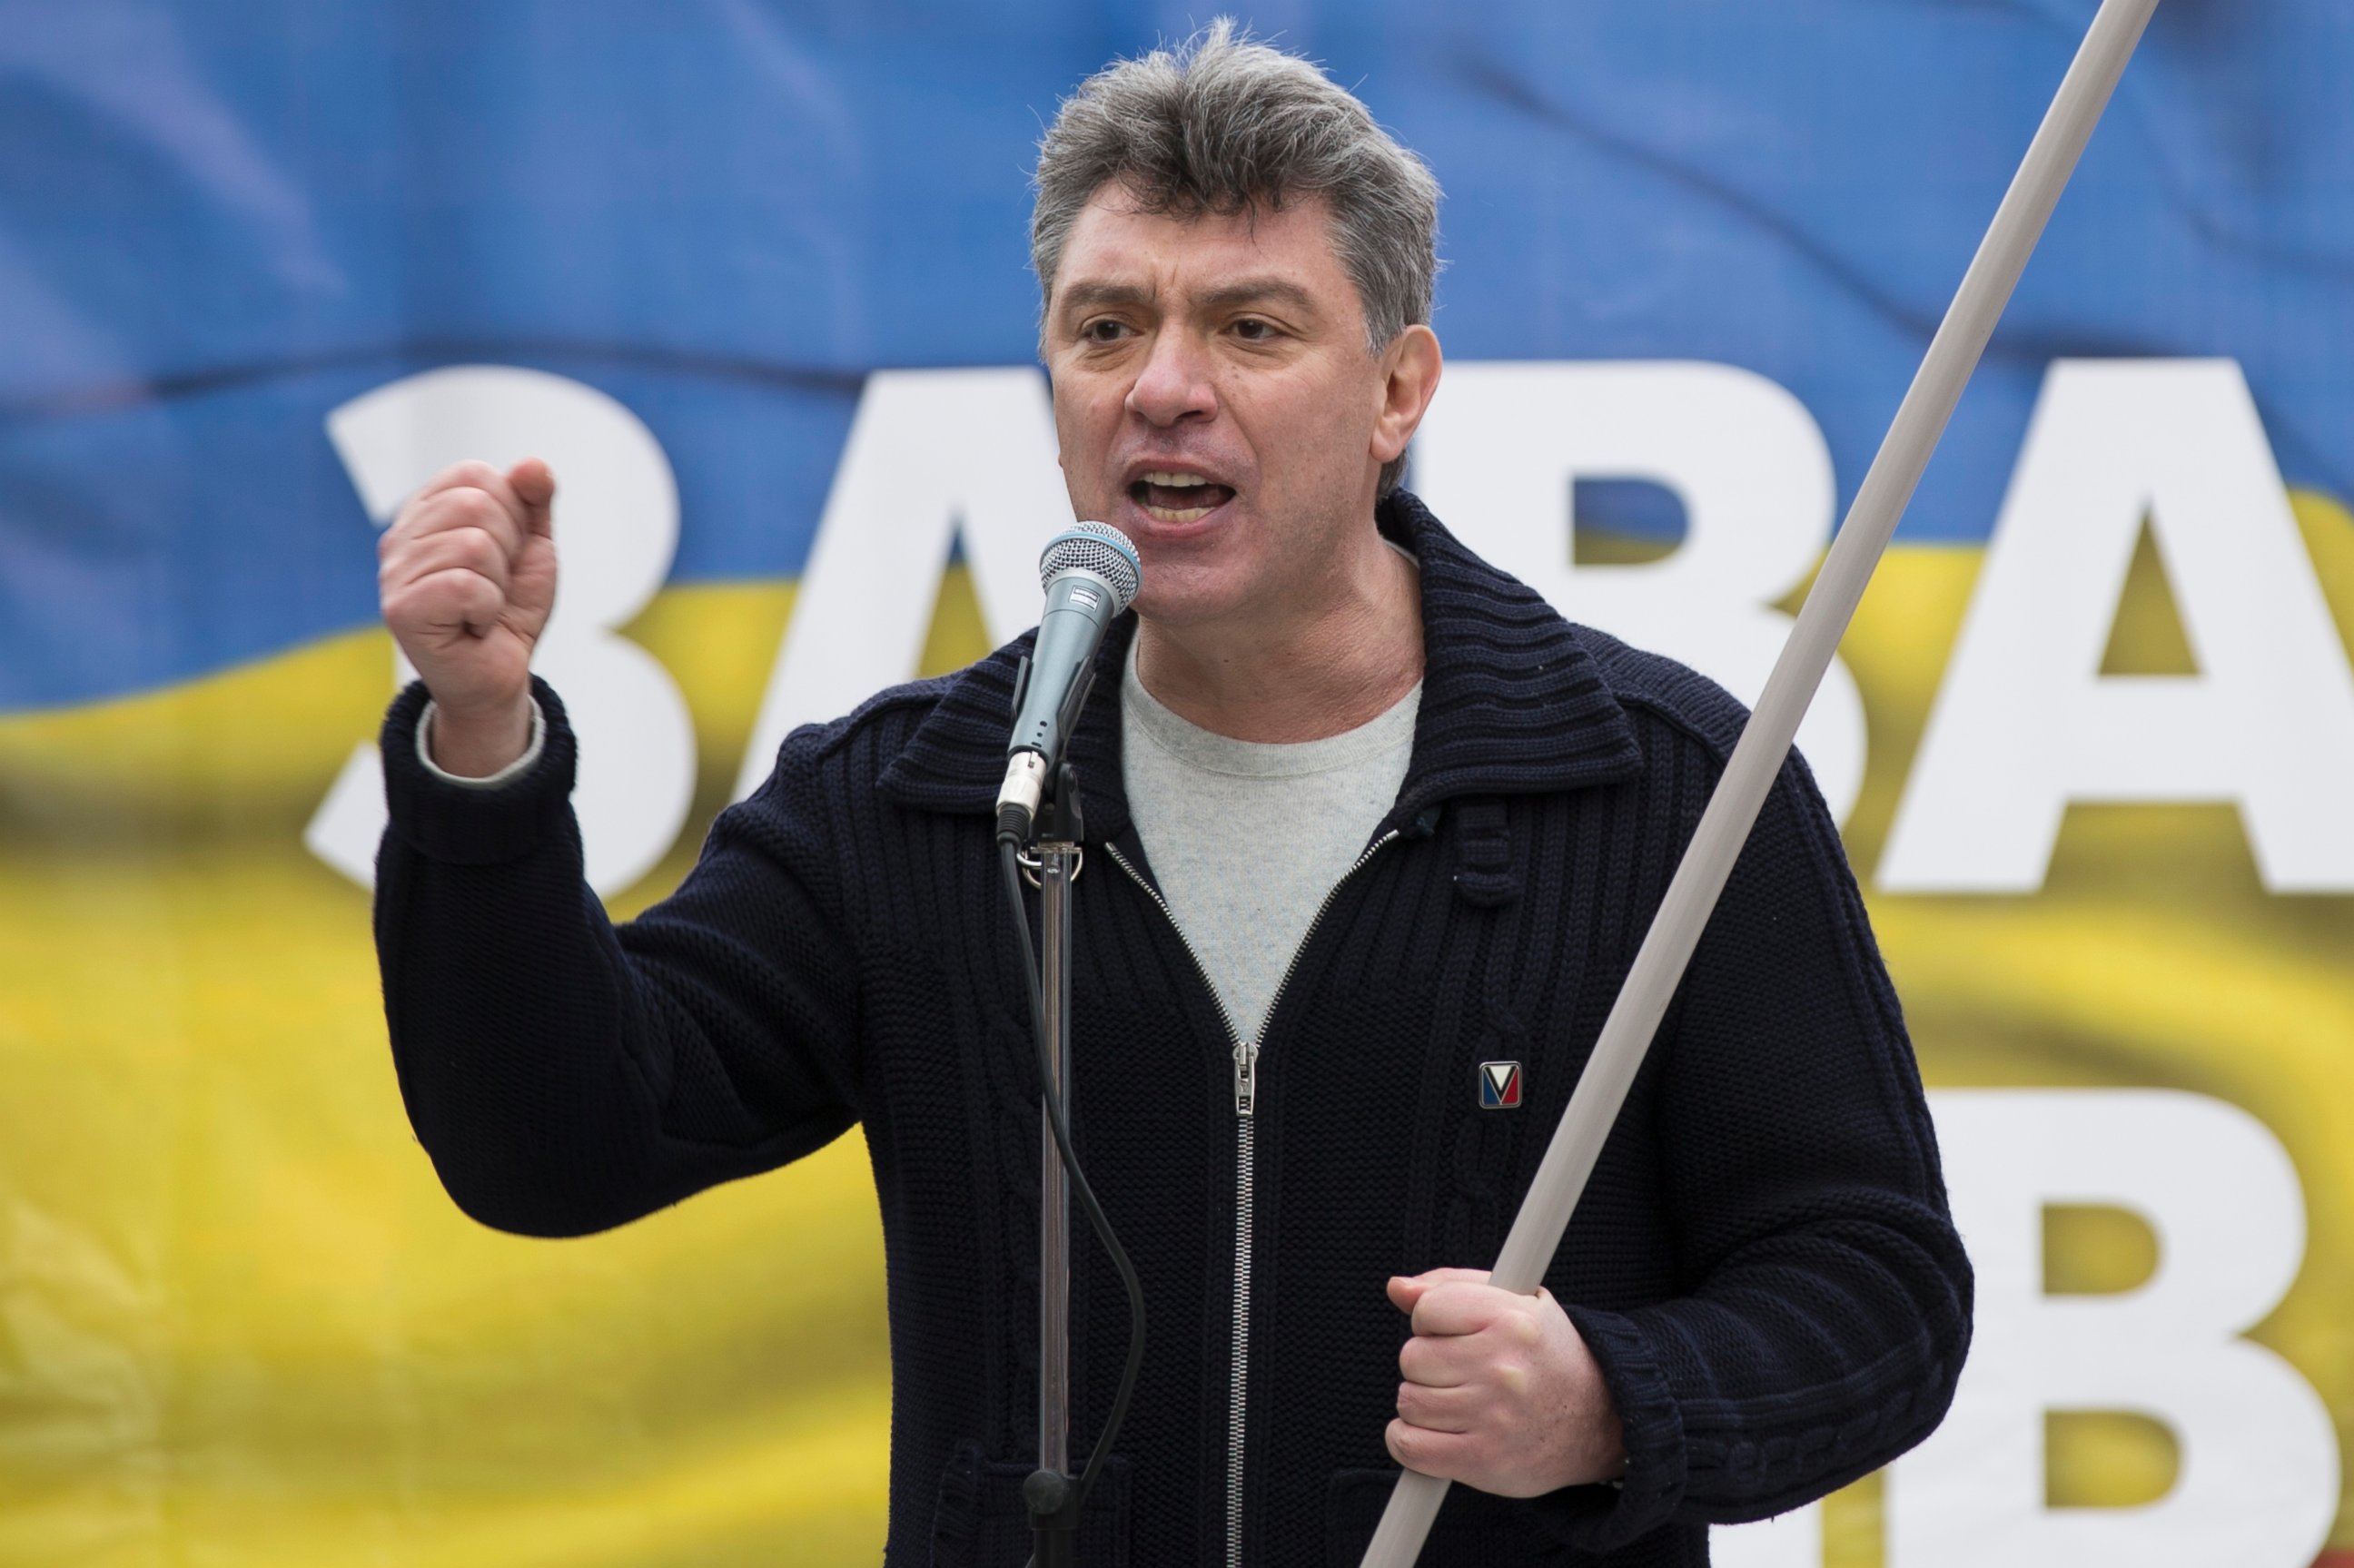 PHOTO: Boris Nemtsov, a former Russian deputy prime minister and opposition leader addresses demonstrators during a massive rally to oppose president Vladimir Putin's policies in Ukraine, in Moscow on March 15, 2014.  